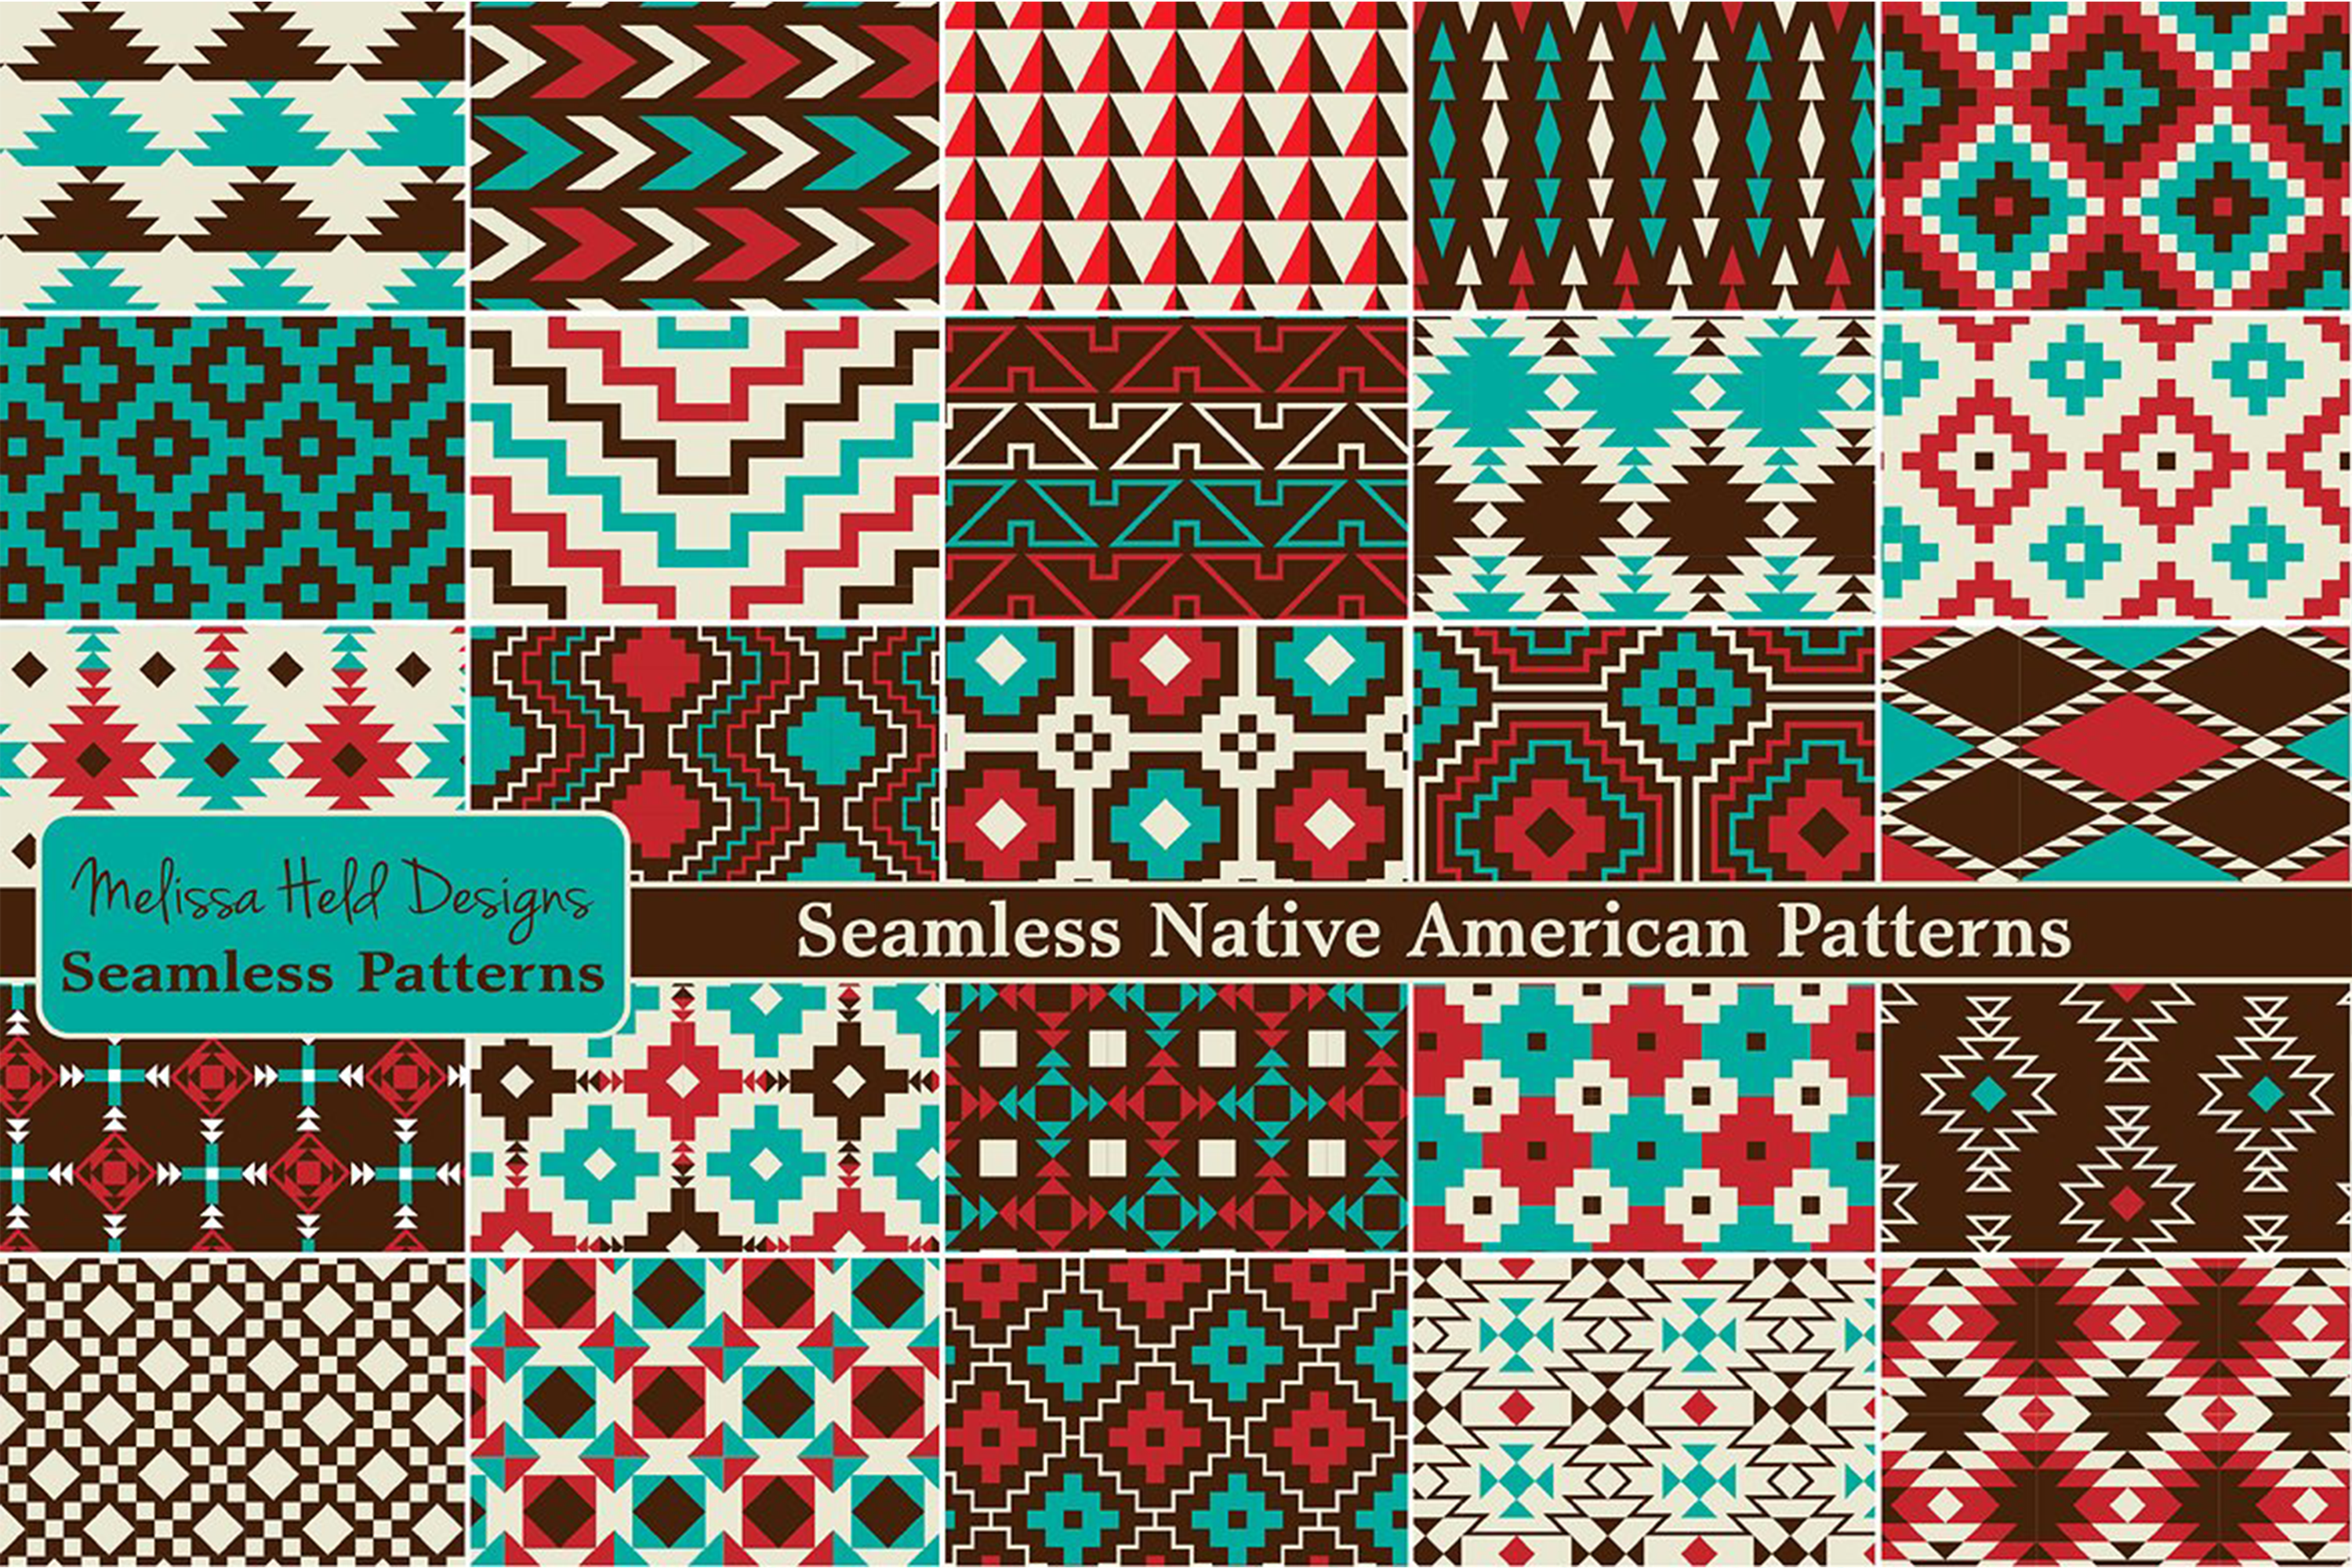 native-american-pattern-free-vector-download-free-vector-art-stock